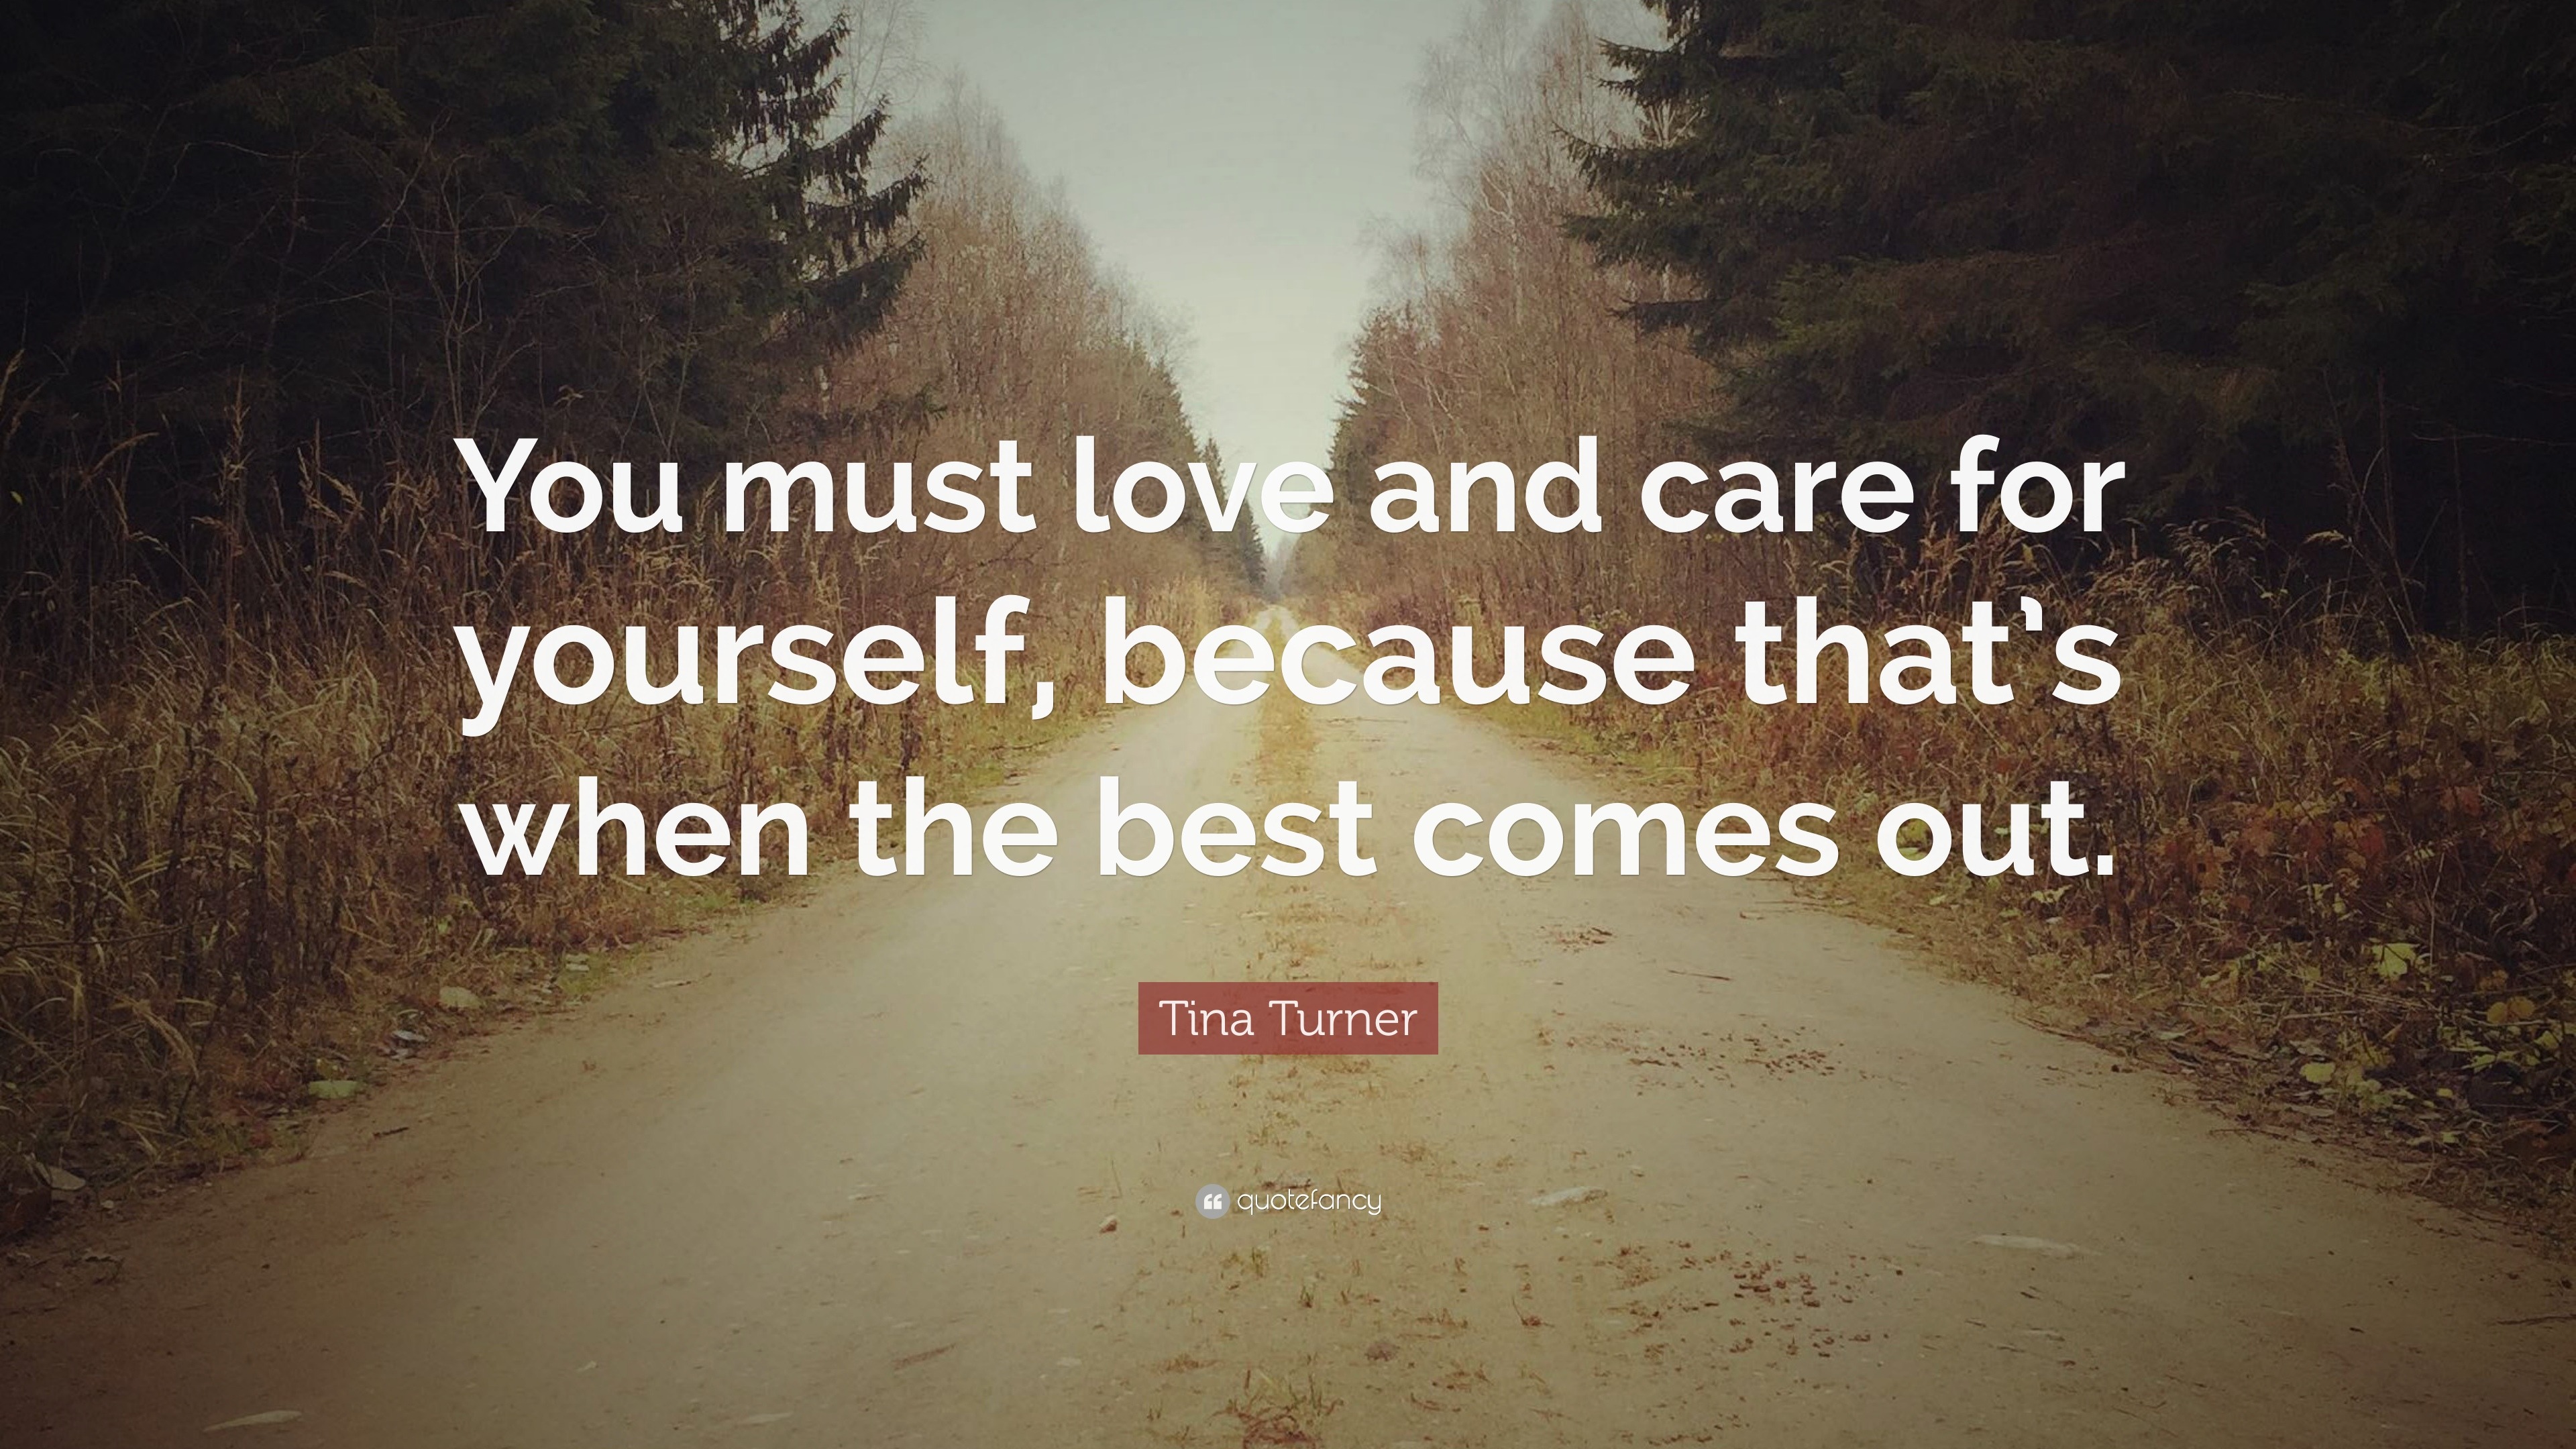 Tina Turner Quote: “You must love and care for yourself, because that’s ...